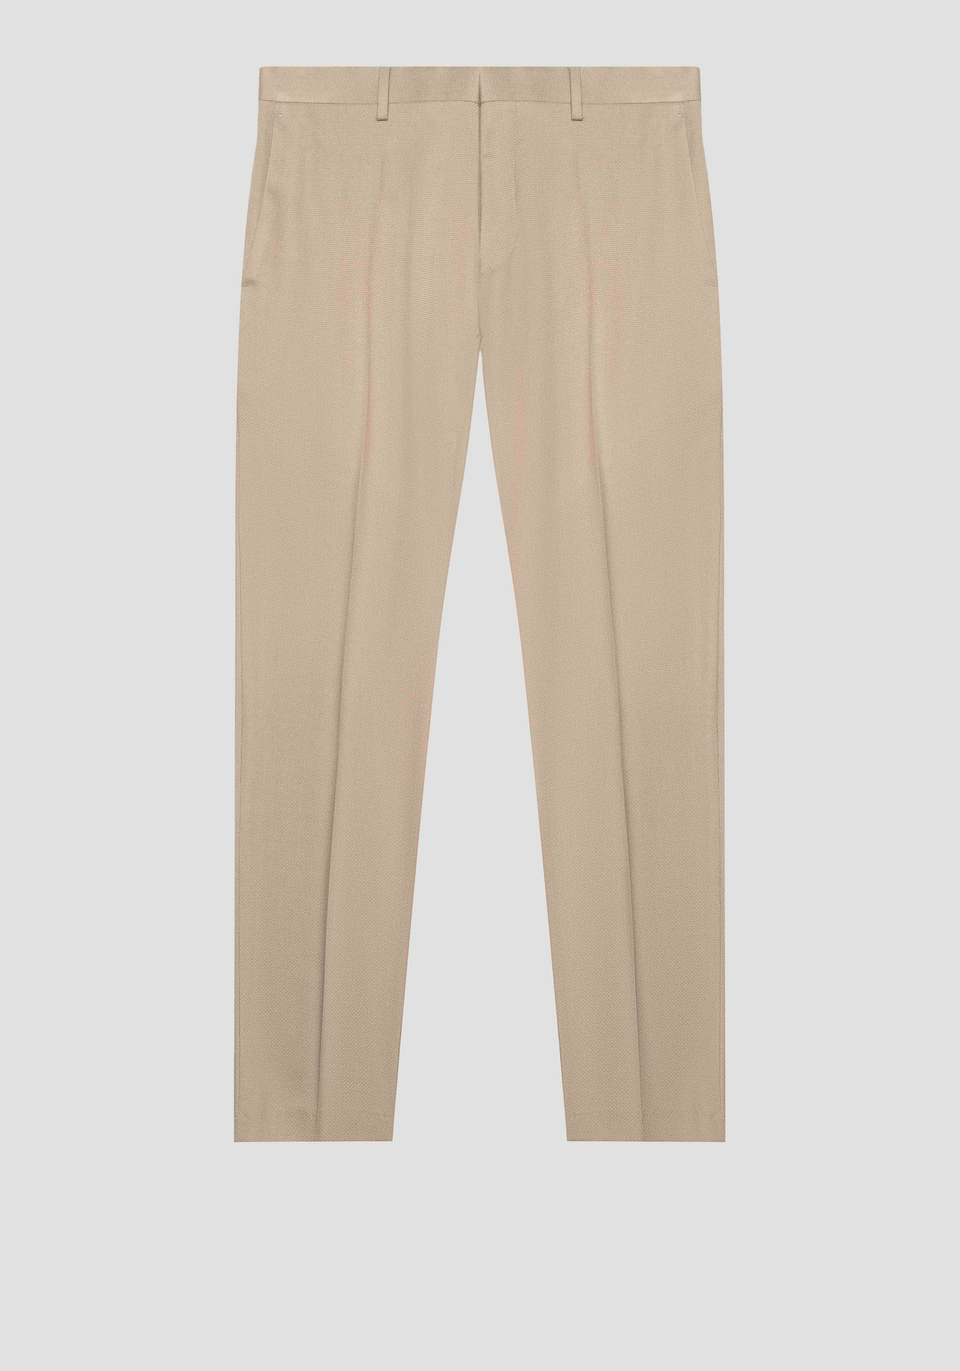 SLIM FIT "BONNIE" PANTS IN VISCOSE BLEND STRETCH FABRIC WITH MICRO EMBOSSED PATTERN - Antony Morato Online Shop